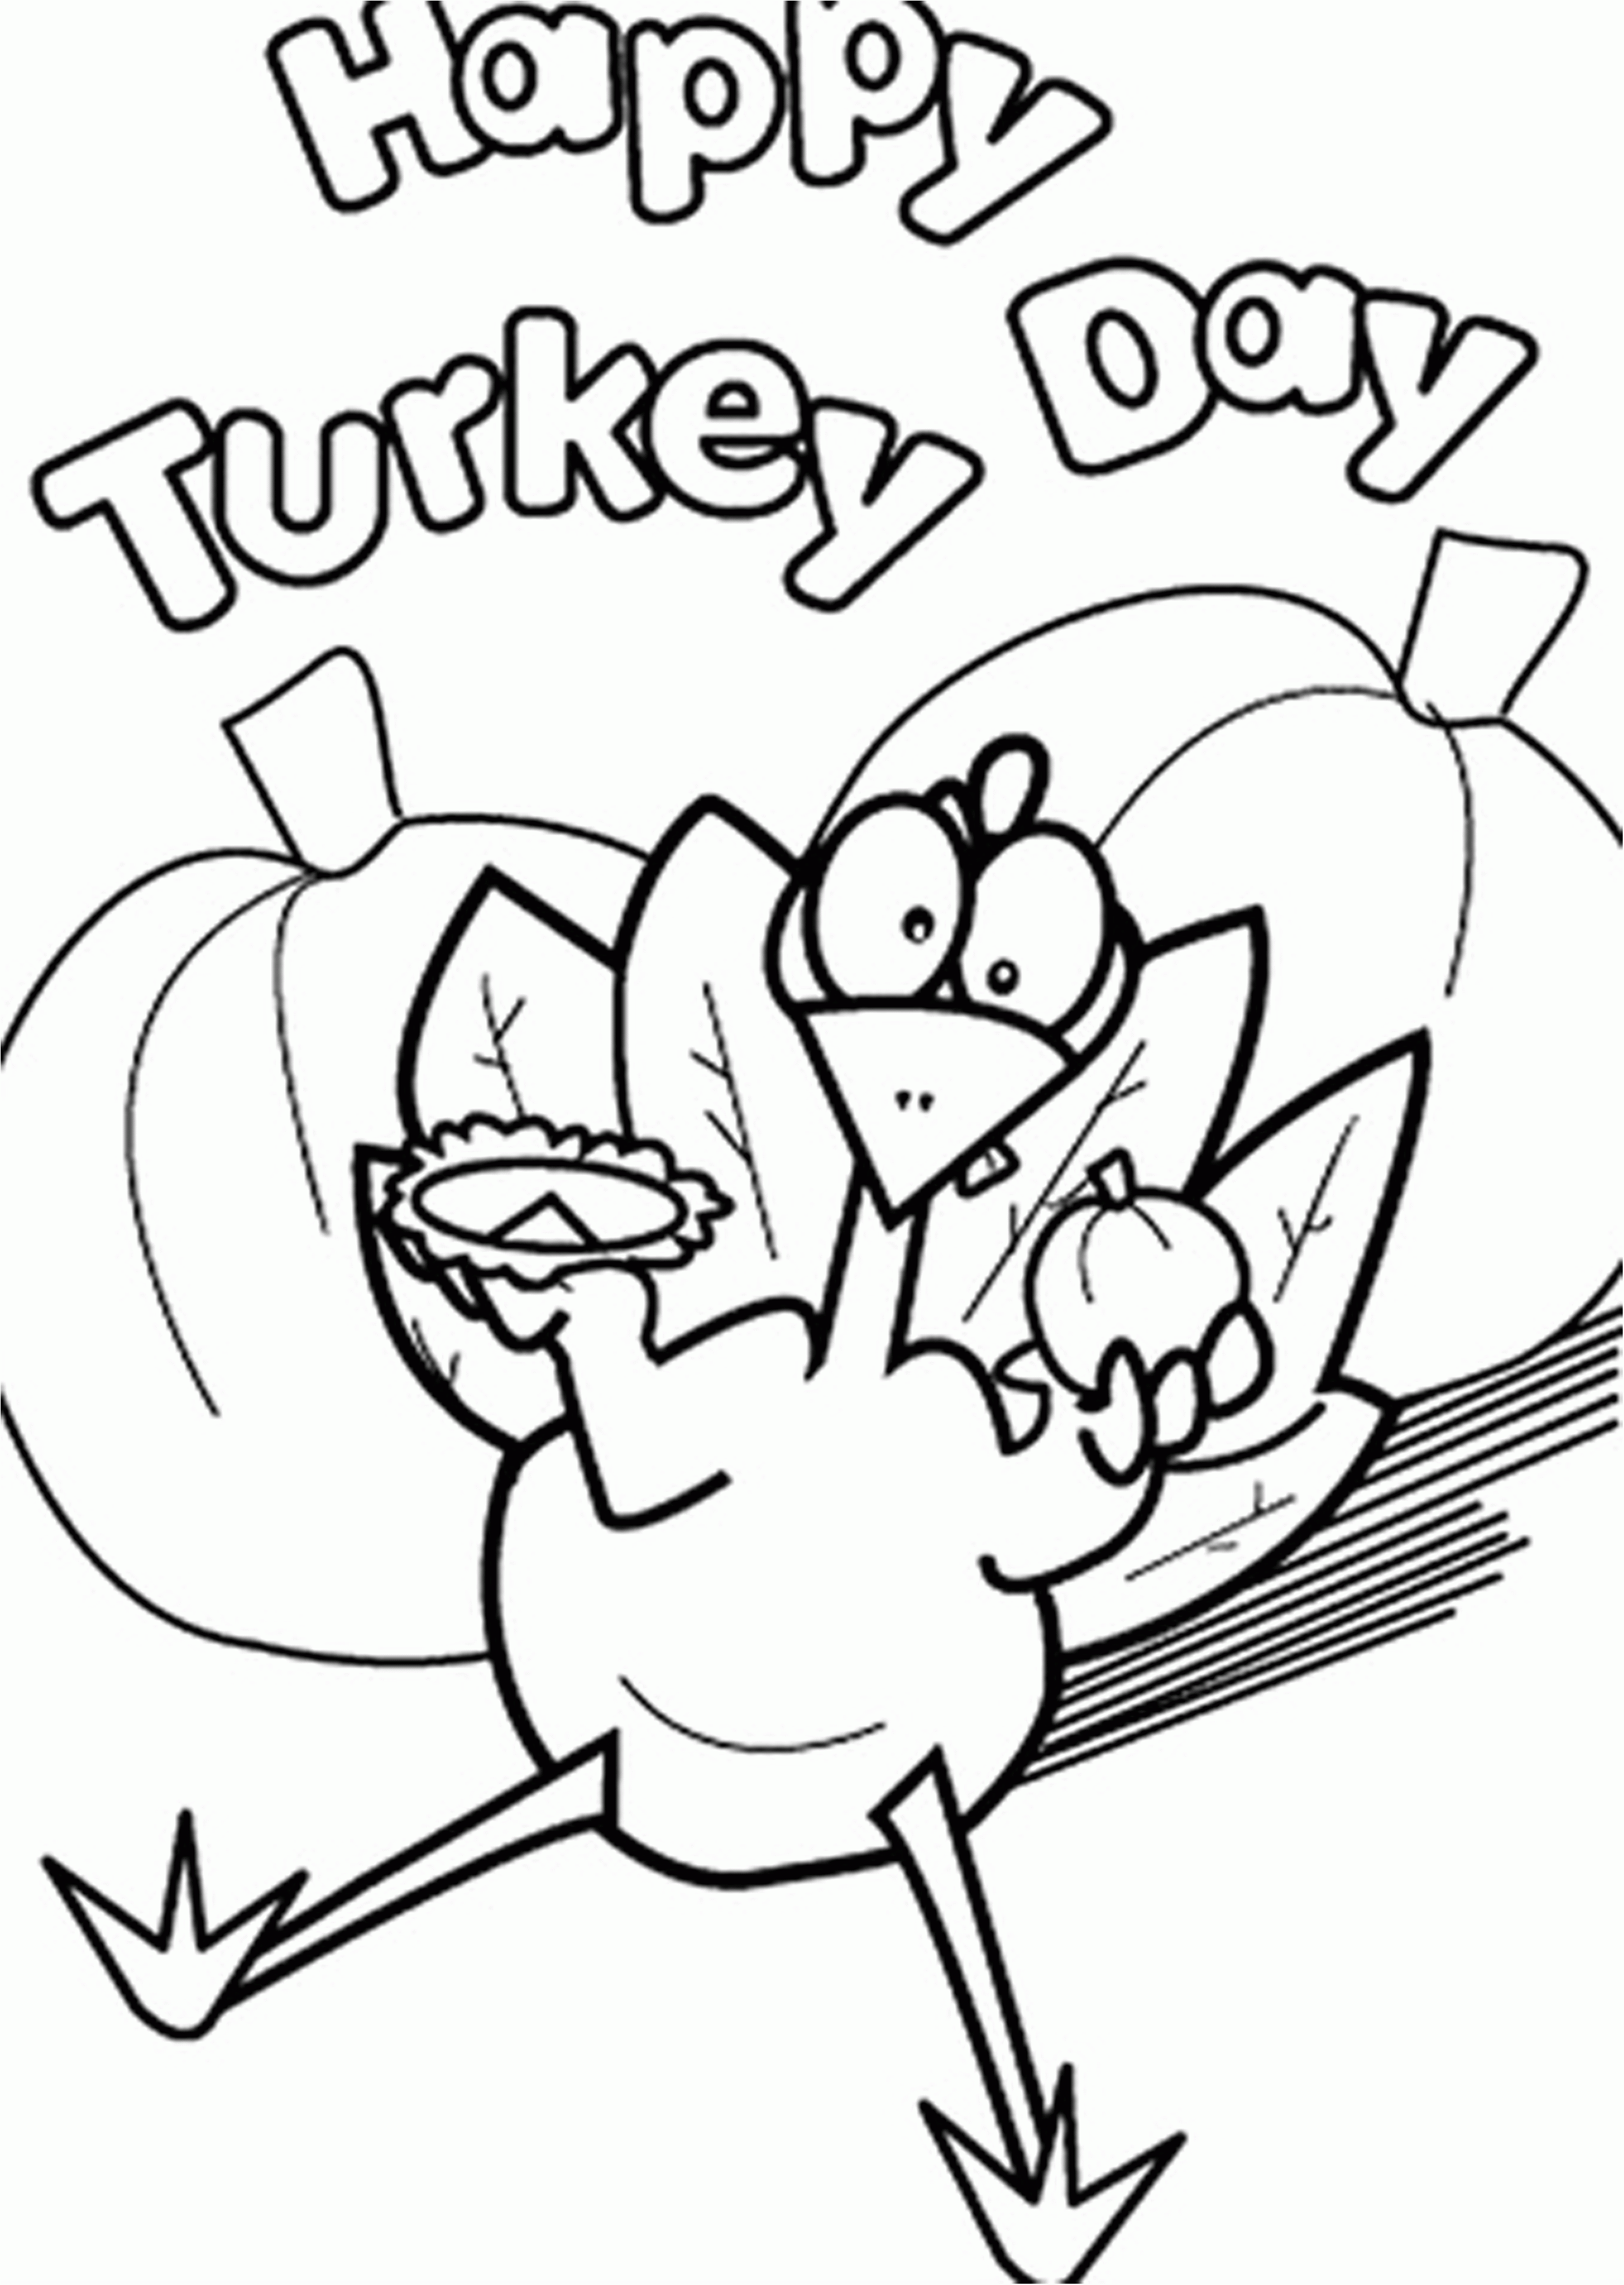 marvelous christian thanksgiving coloring pages free bible coloring pages for thanksgiving 